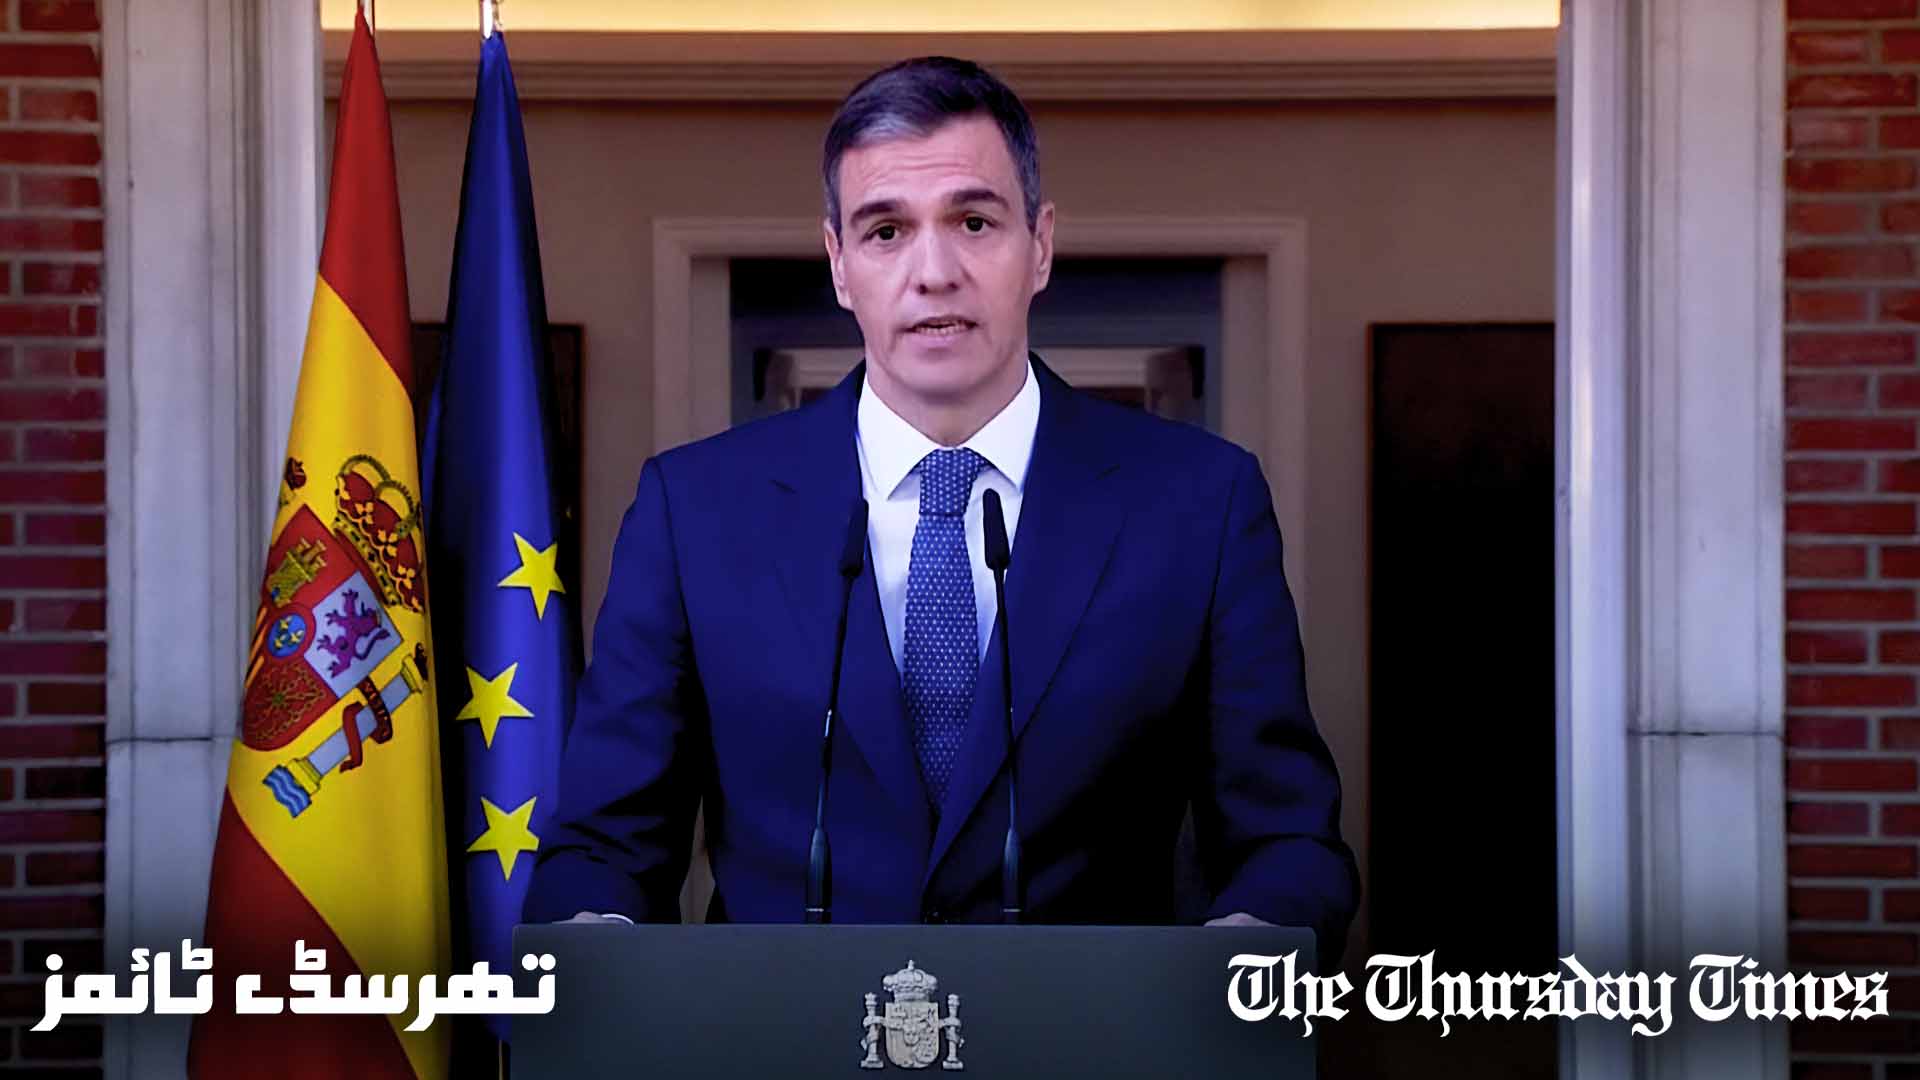 A file photo is shown of Spanish prime minister Pedro Sanchez. — FILE/THE THURSDAY TIMES